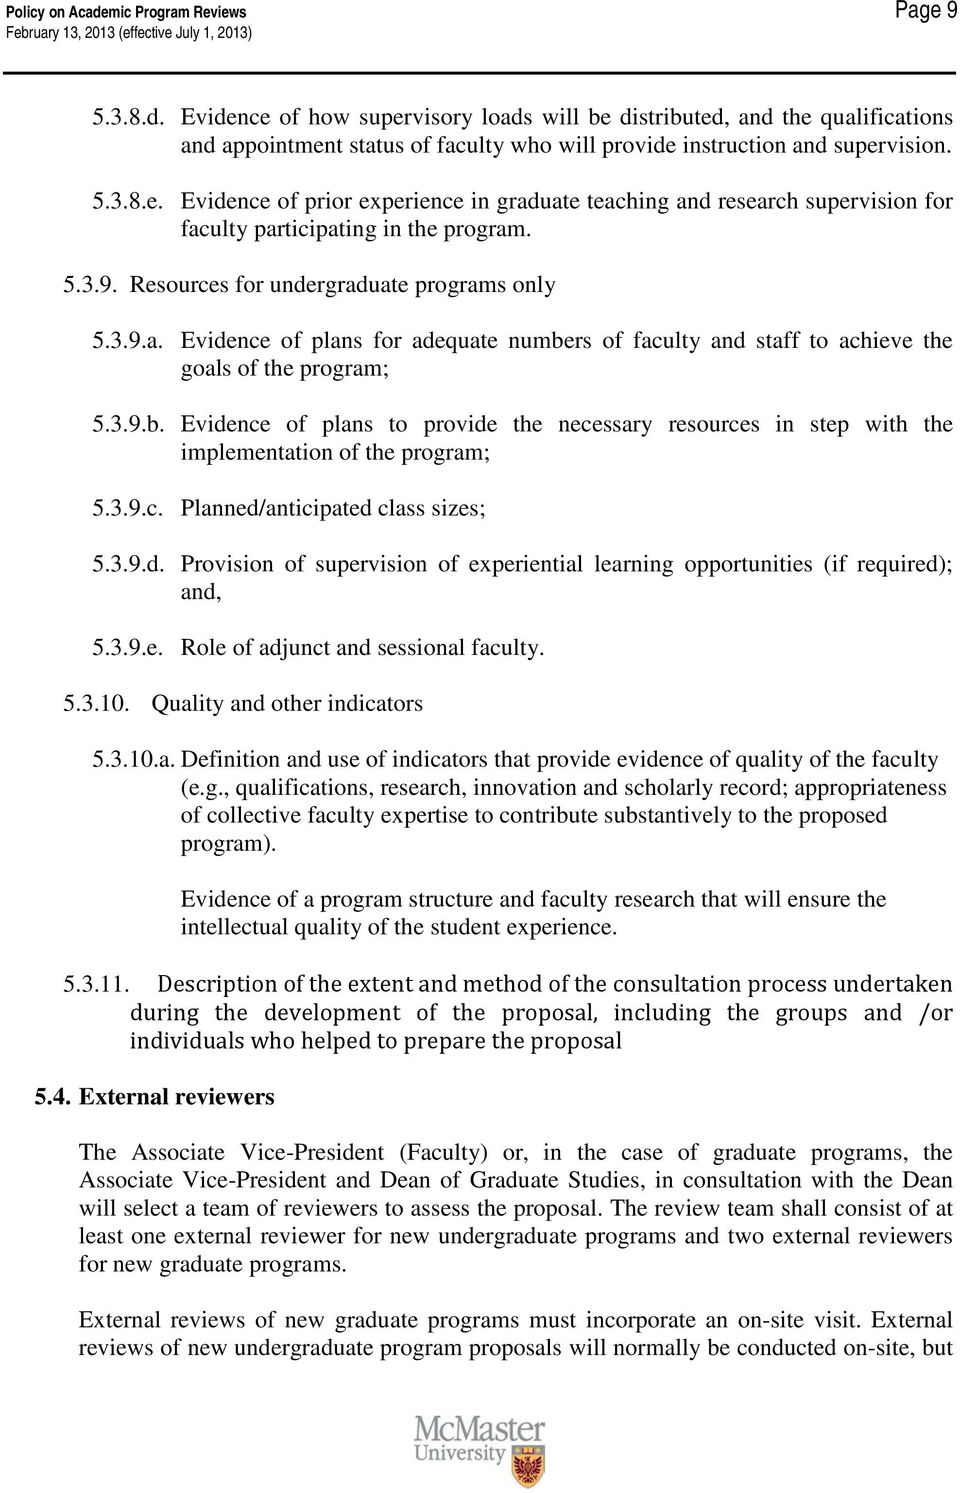 3.9.b. Evidence of plans to provide the necessary resources in step with the implementation of the program; 5.3.9.c. Planned/anticipated class sizes; 5.3.9.d. Provision of supervision of experiential learning opportunities (if required); and, 5.